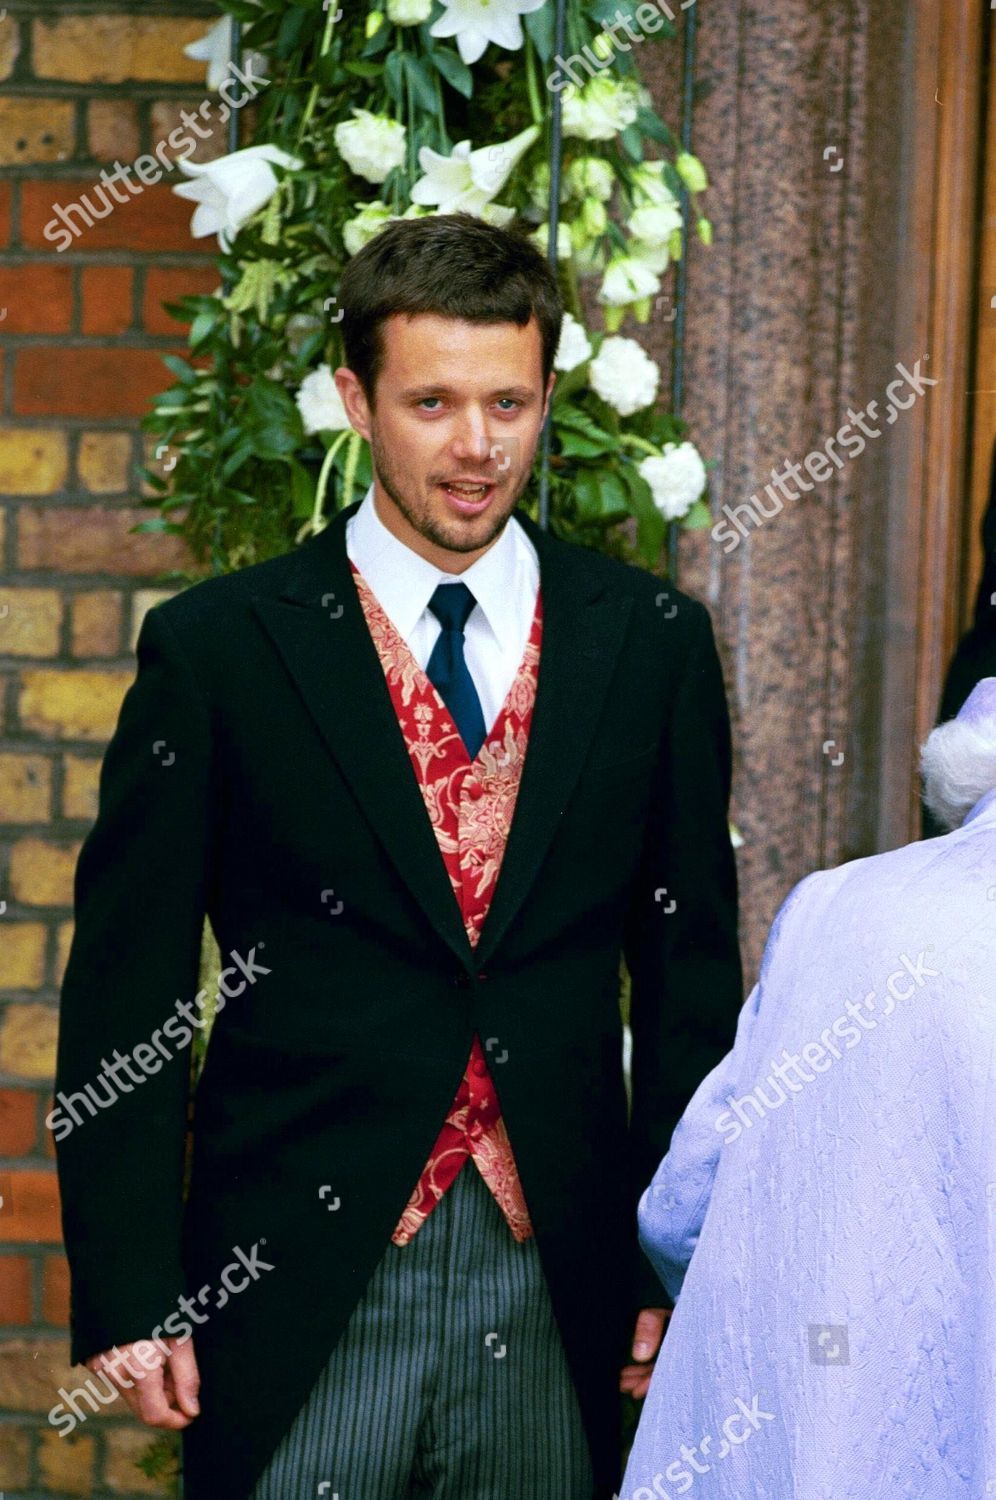 wedding-of-princess-alexia-of-greece-to-carlos-morales-quintana-at-the-greek-orthodox-cathedral-of-st-sophia-in-london-britain-1999-shutterstock-editorial-307941r.jpg